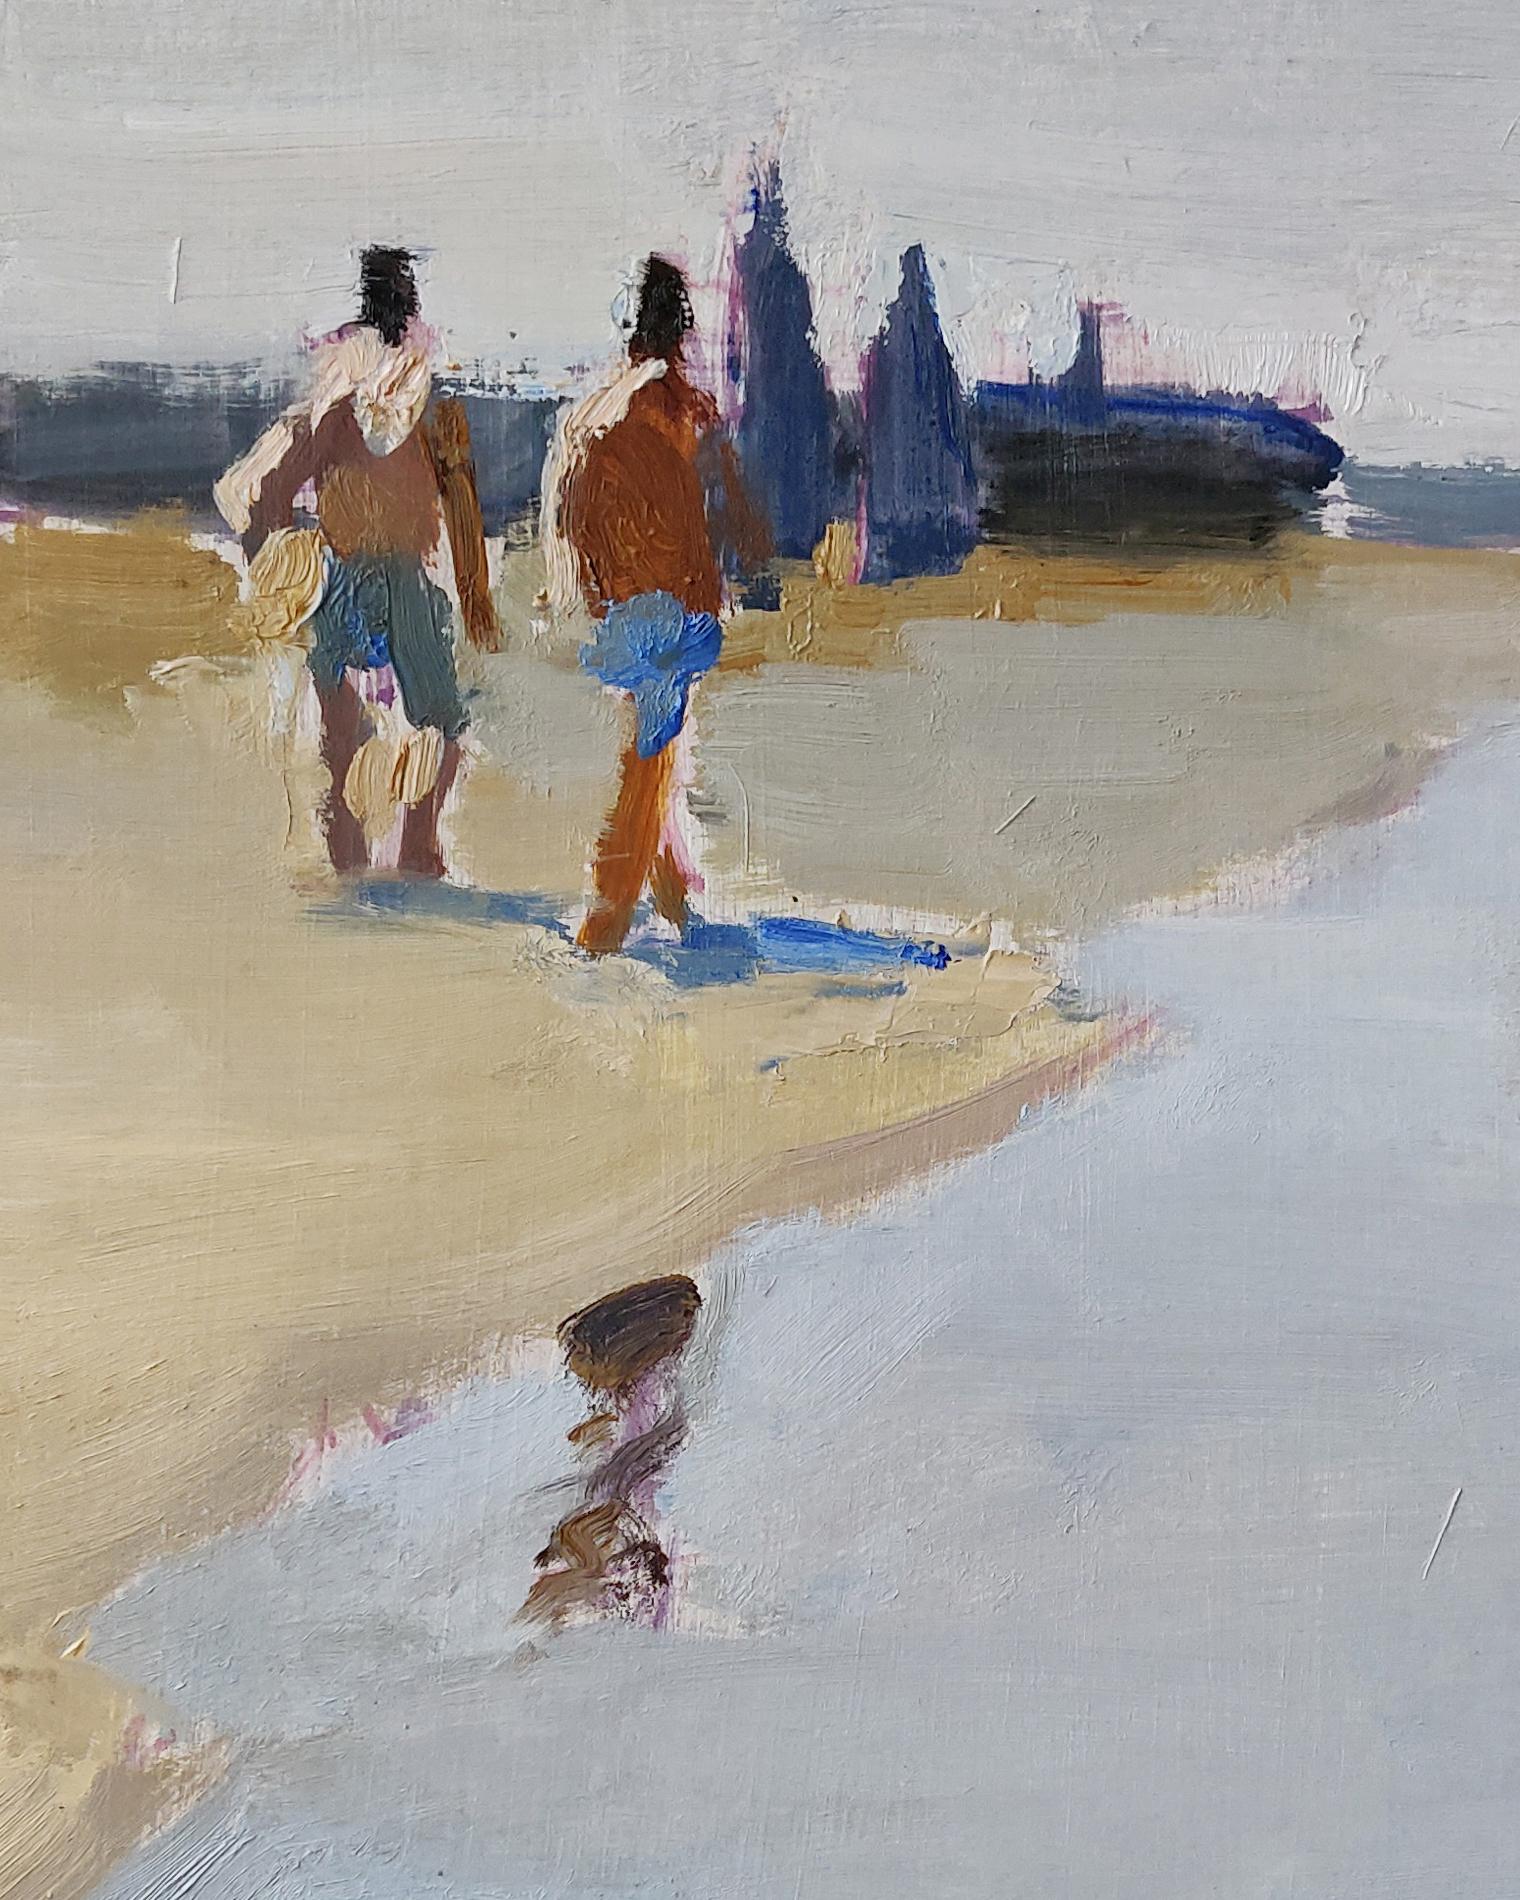 Executed with extraordinary painterly fluency and spontaneity, this beach scene immediately invokes the atmosphere of a nonchalant day spent on a beach. Short staccato brushstrokes used to render the figures and the sea foam alternate with the